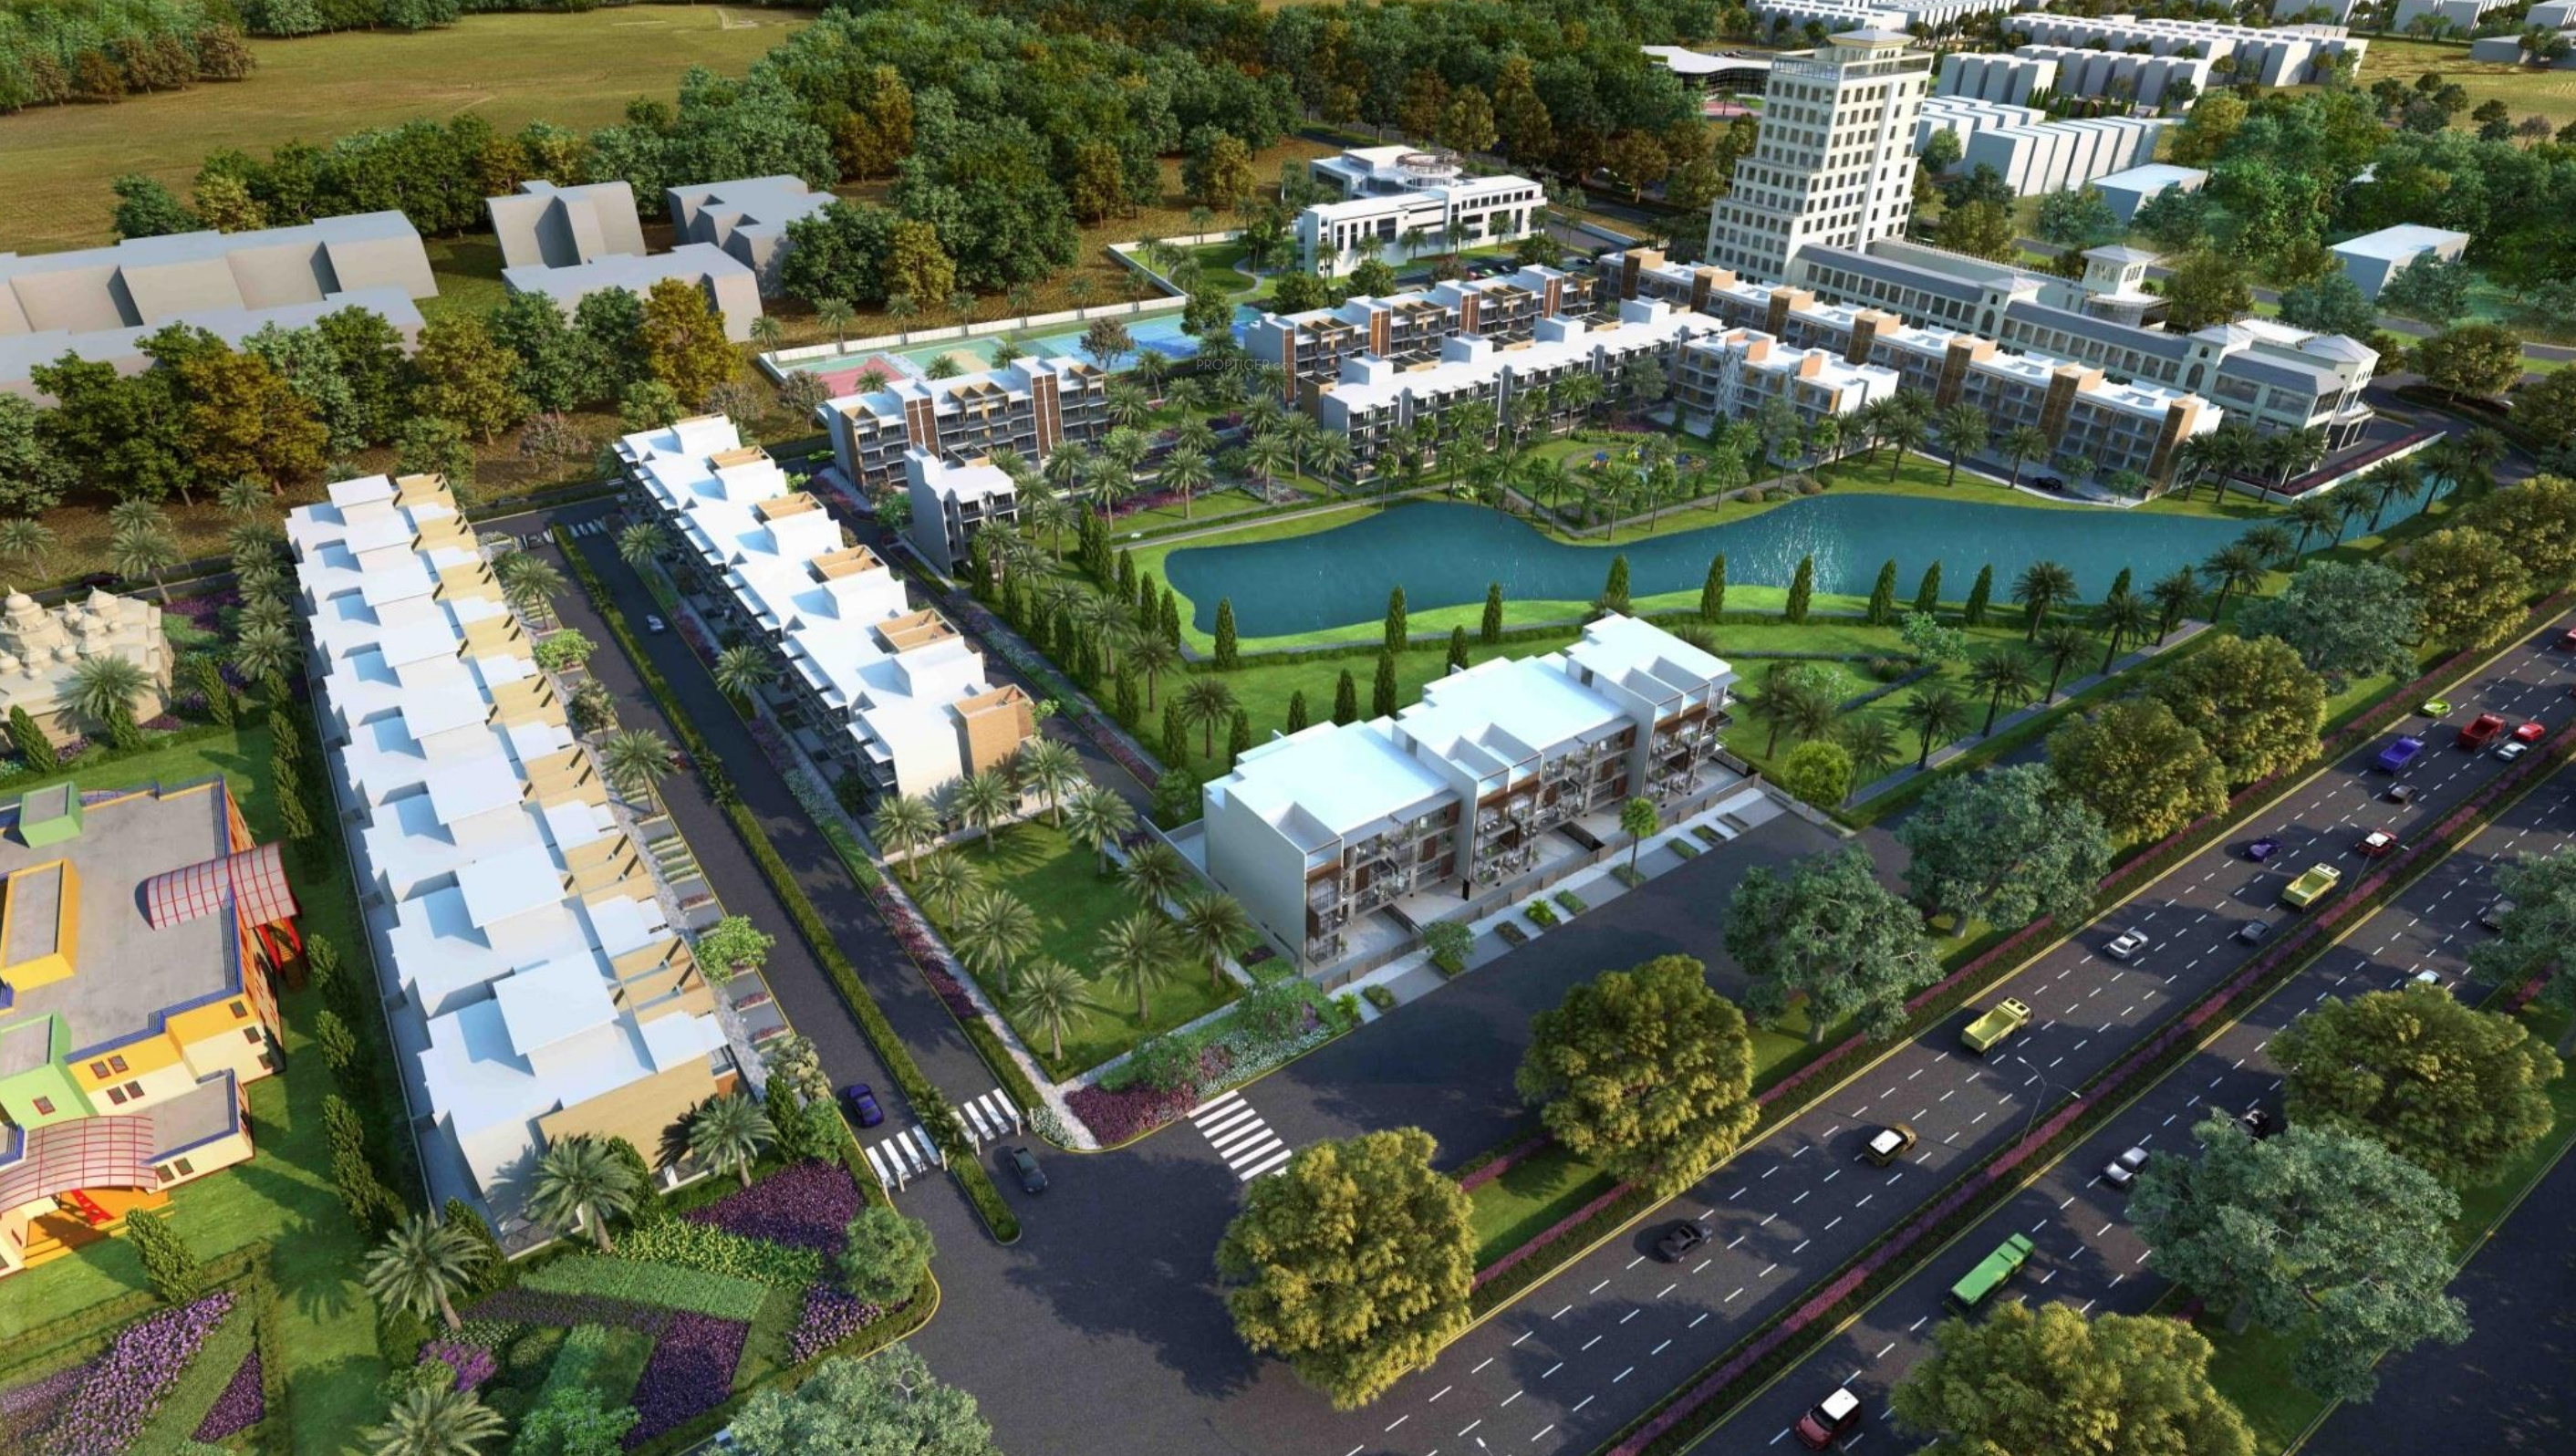 Factors that recommend Adani Samsara strongly for a Great Lifestyle in Gurgaon